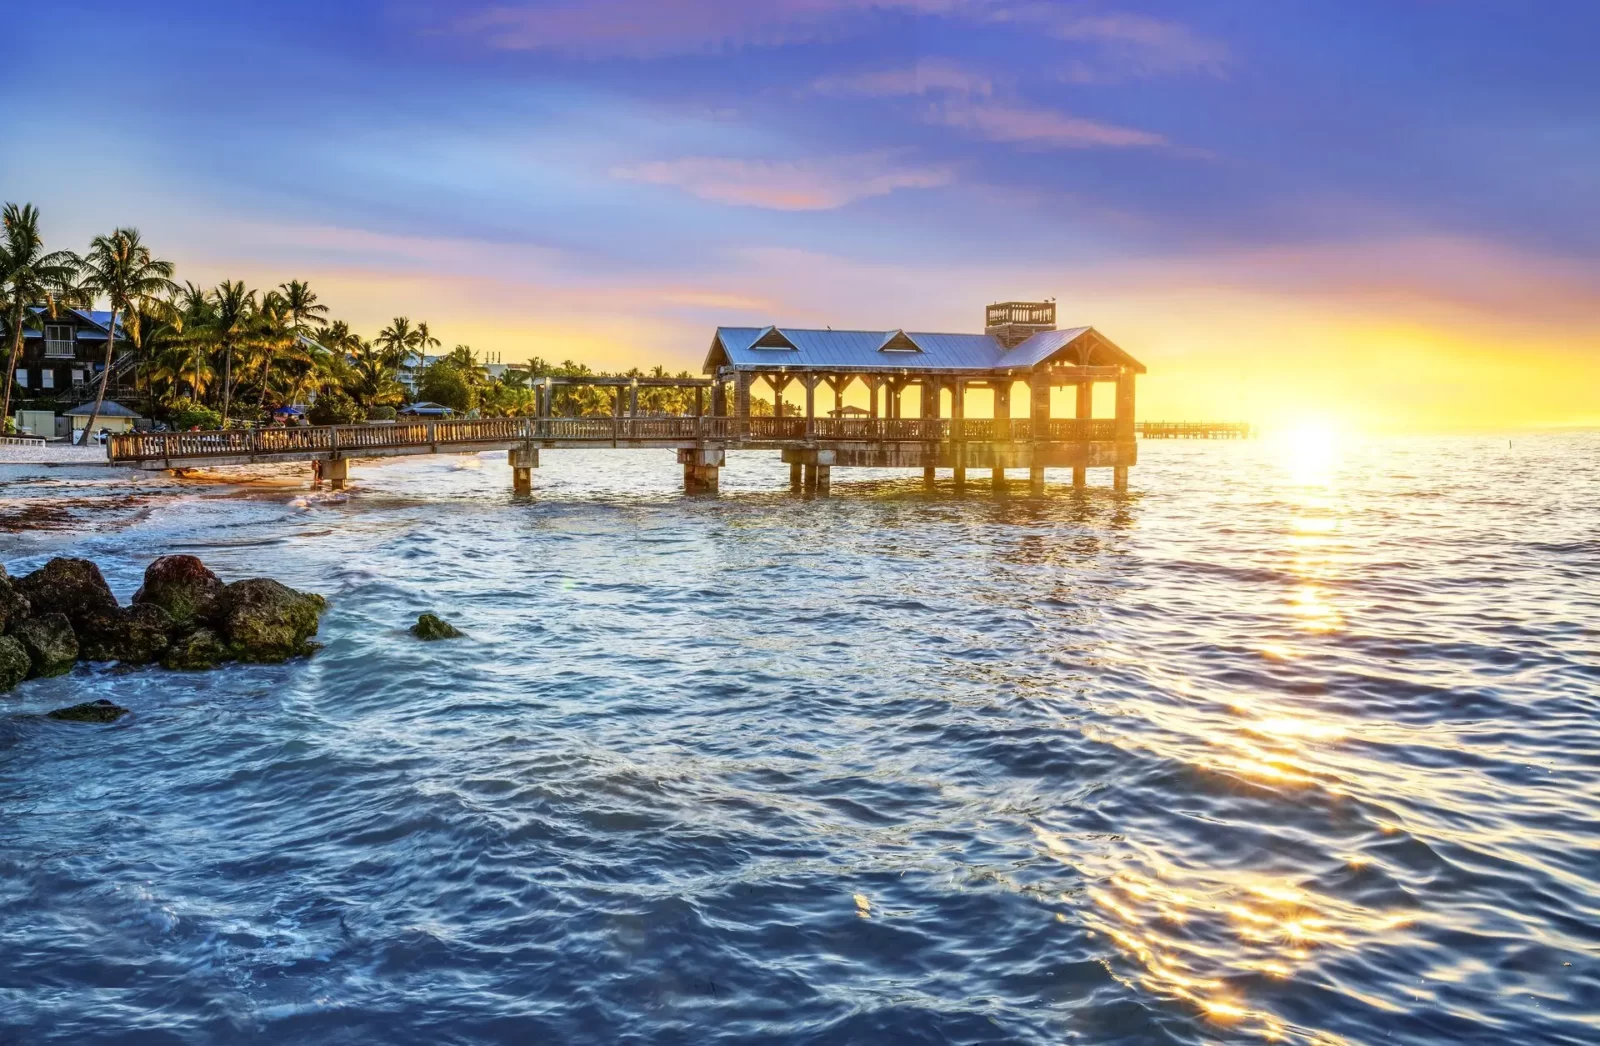 Sunset over pier at Key West, Florida